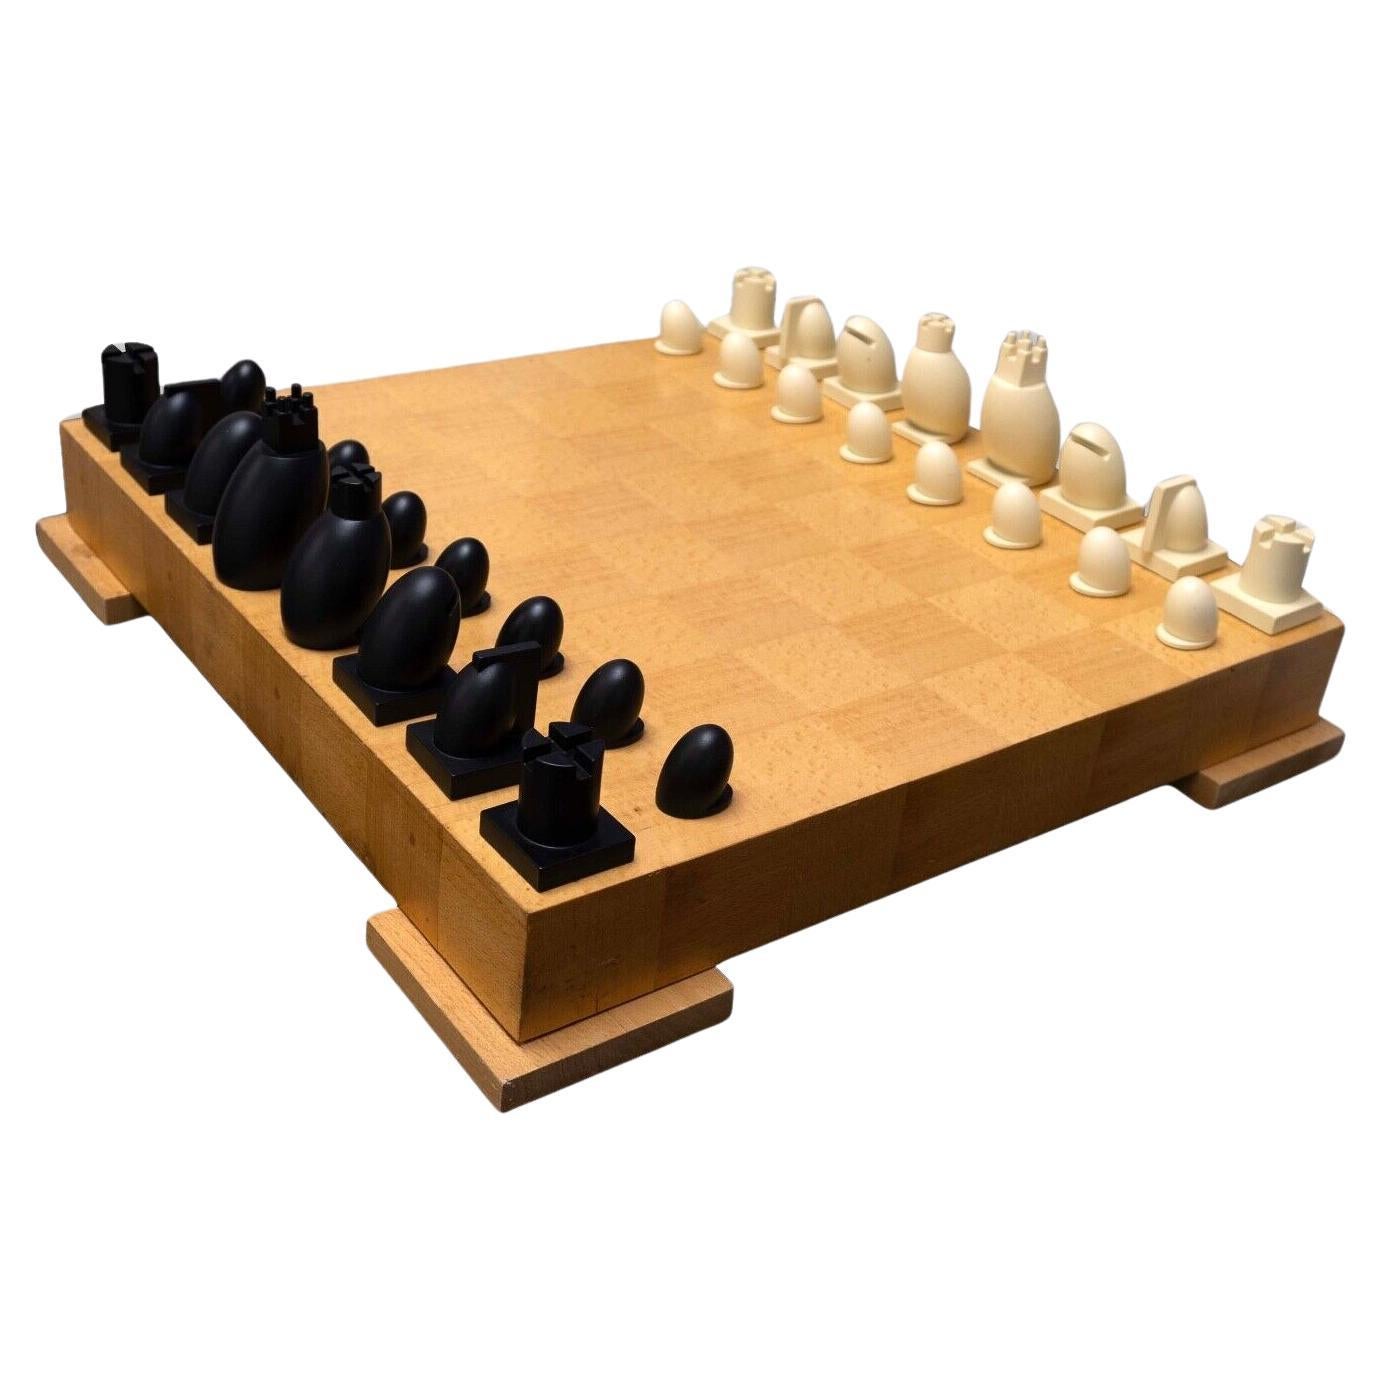 Michael Graves Contemporary Postmodern Chess and Checkers Set Wooden Board